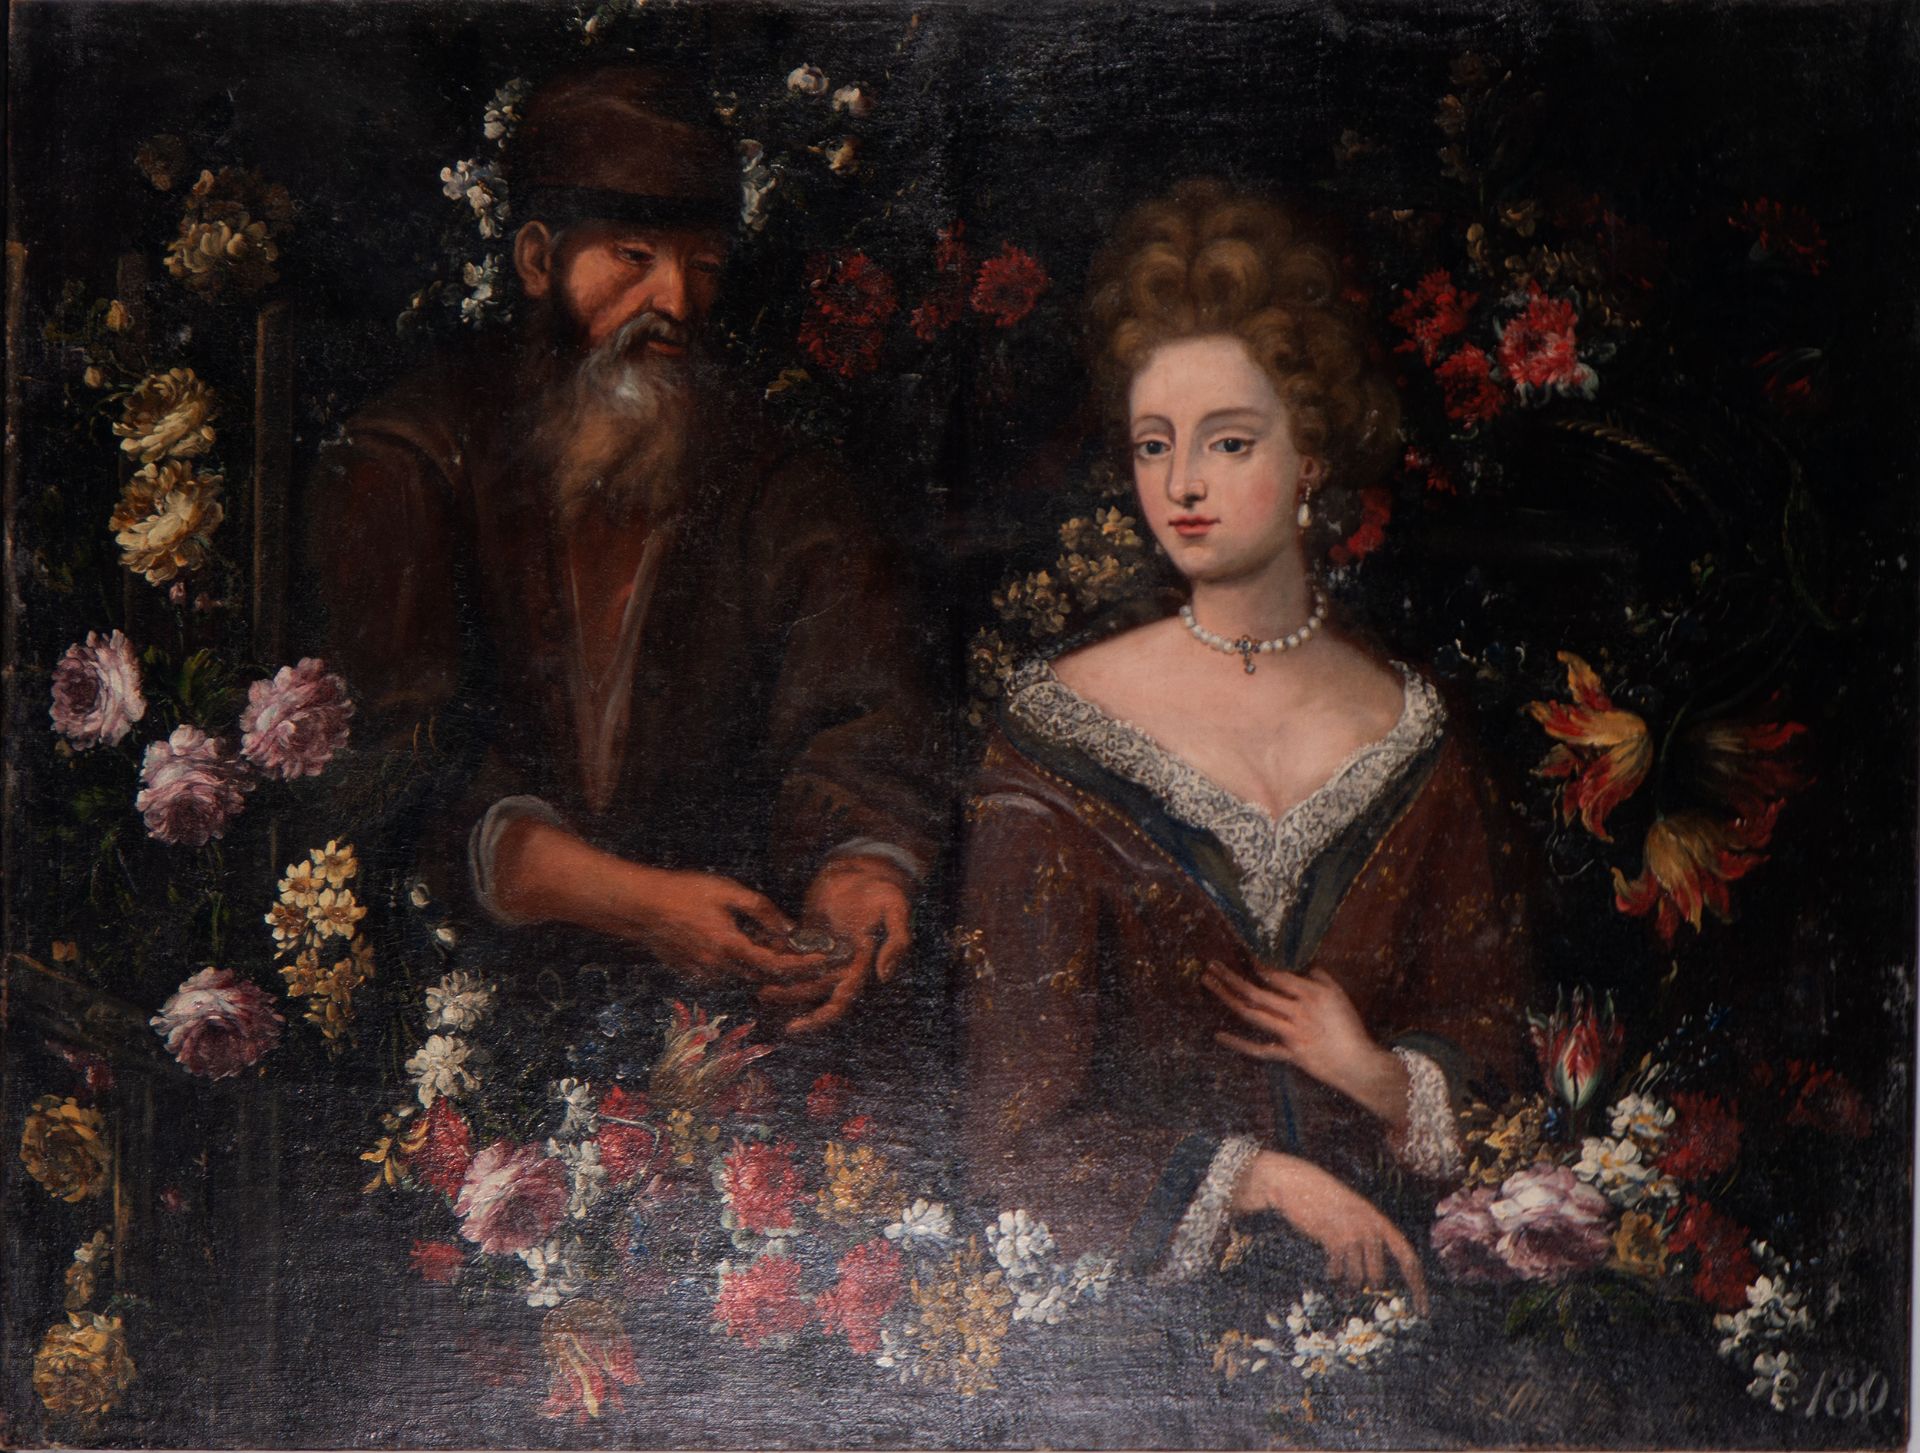 Large Flower Garland, with a lady and a beggar, Flemish school of the 17th century